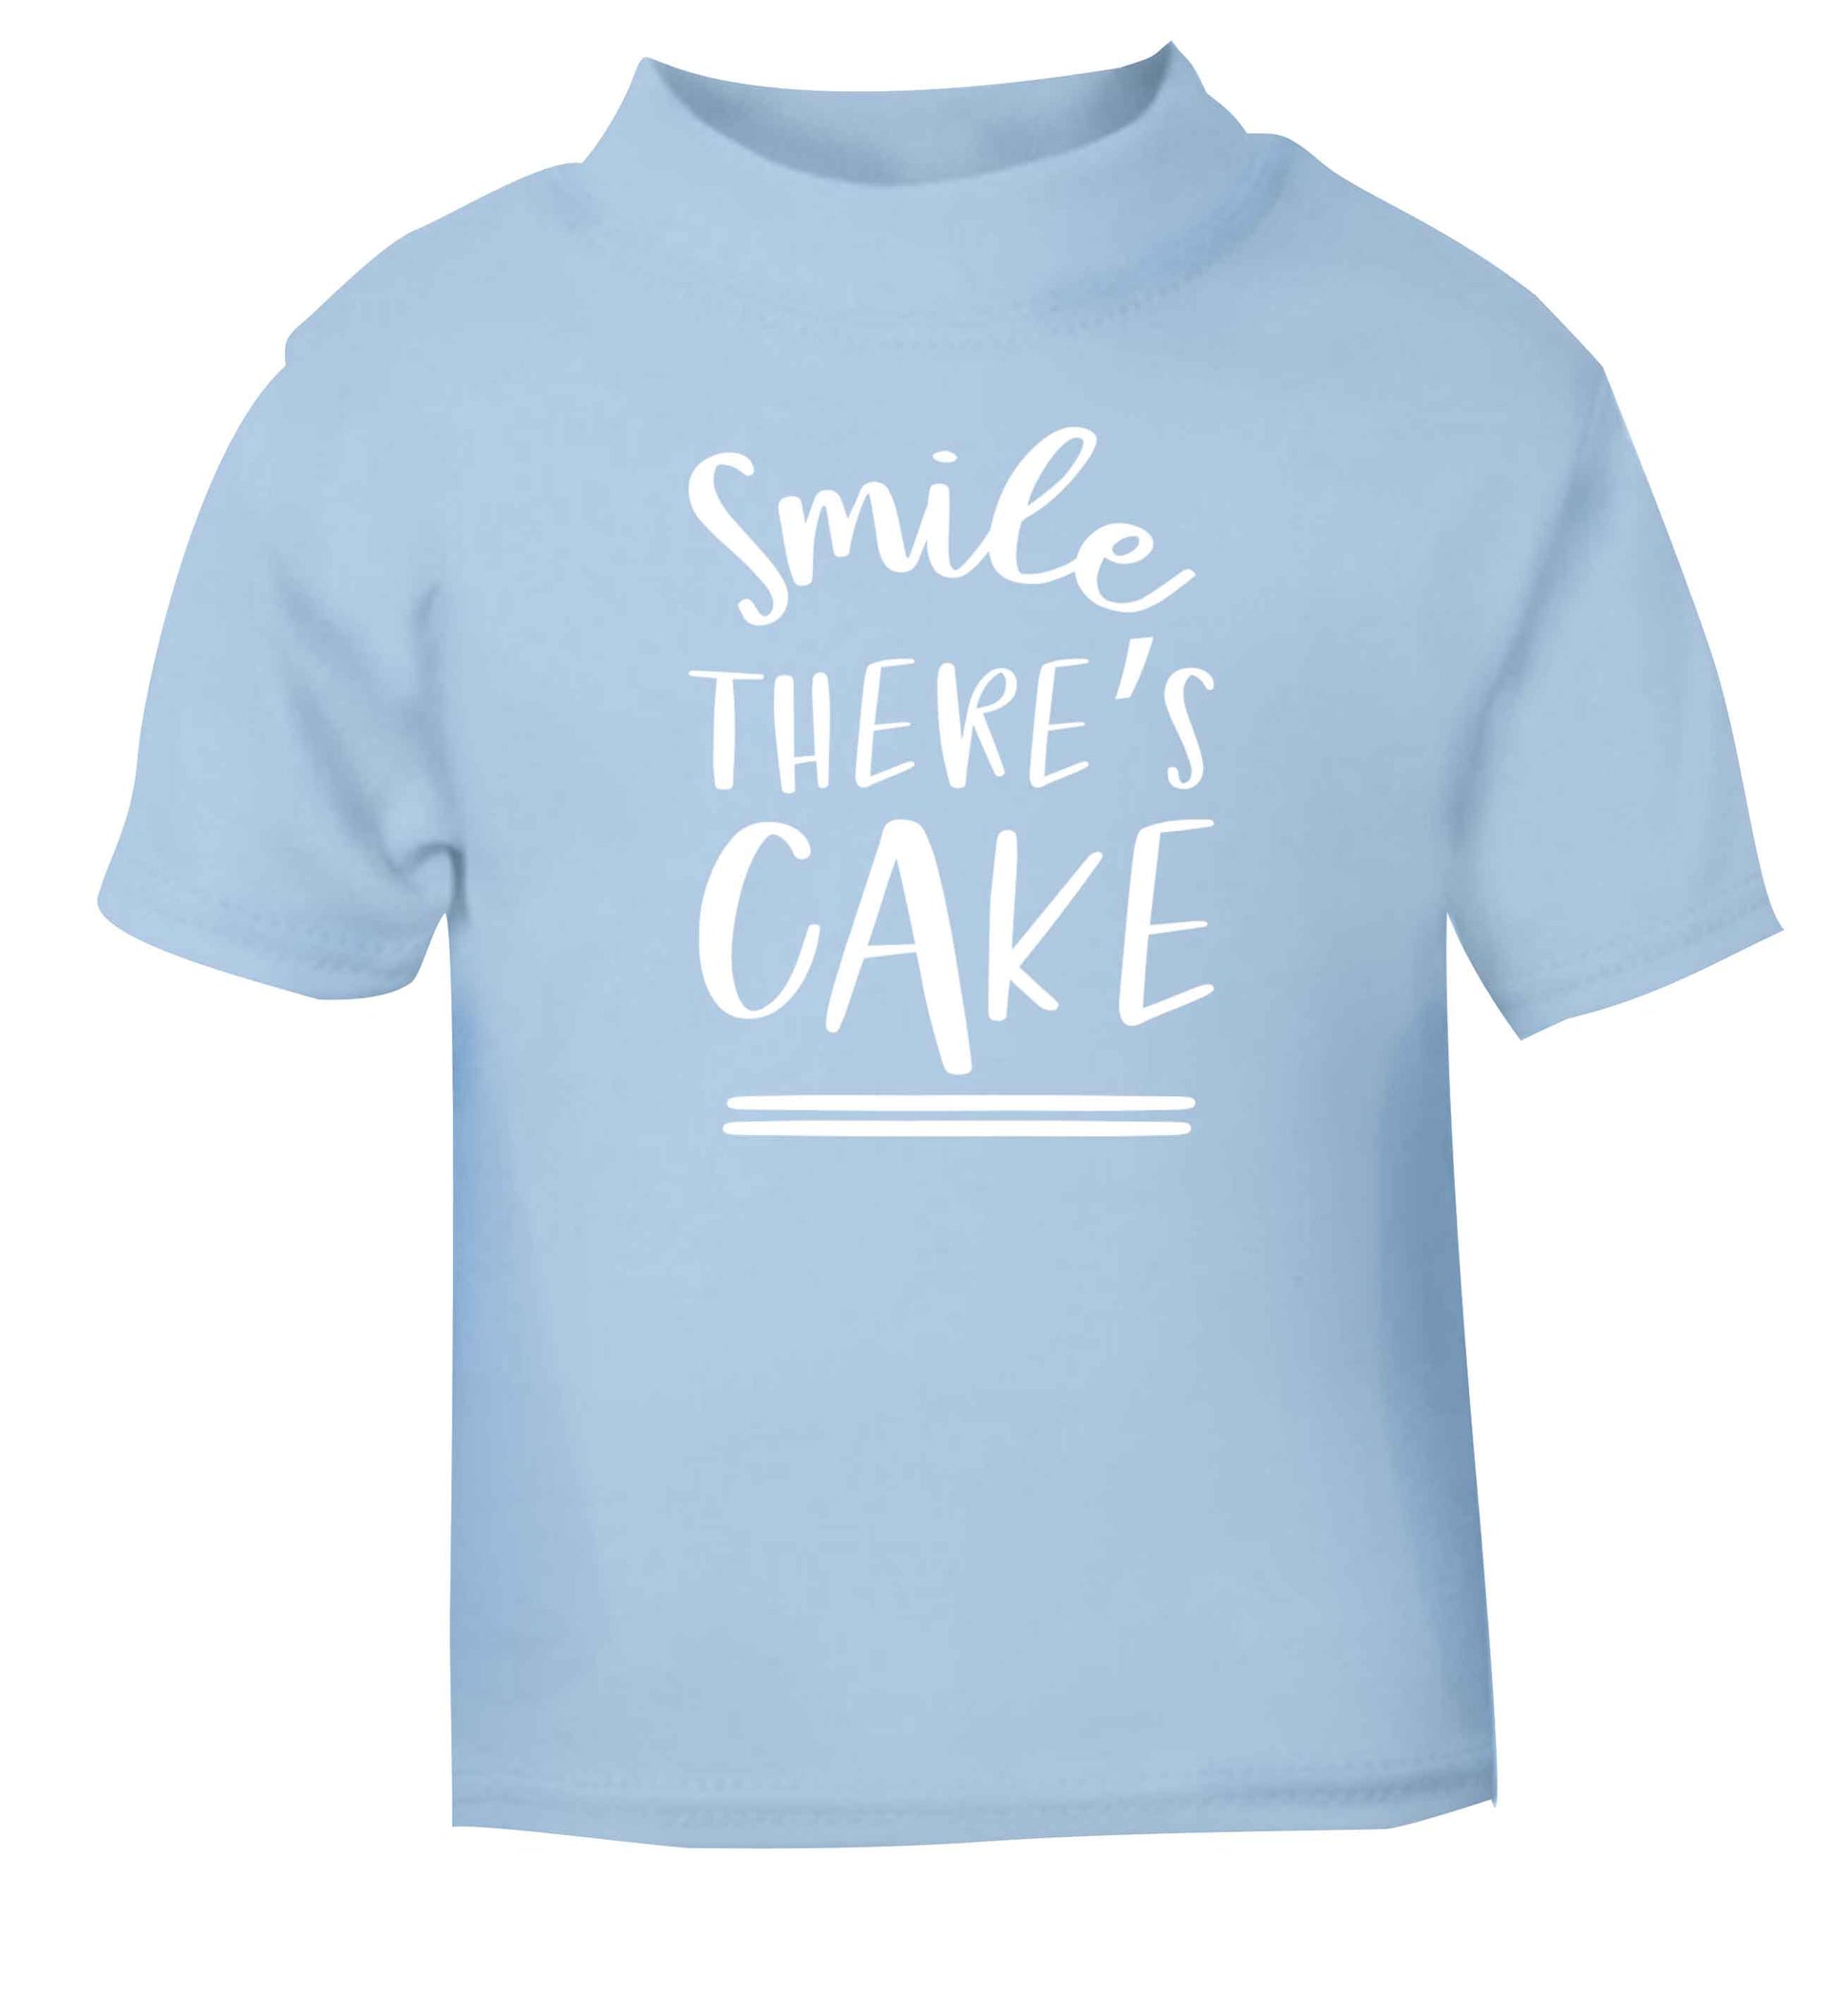 Smile there's cake light blue Baby Toddler Tshirt 2 Years